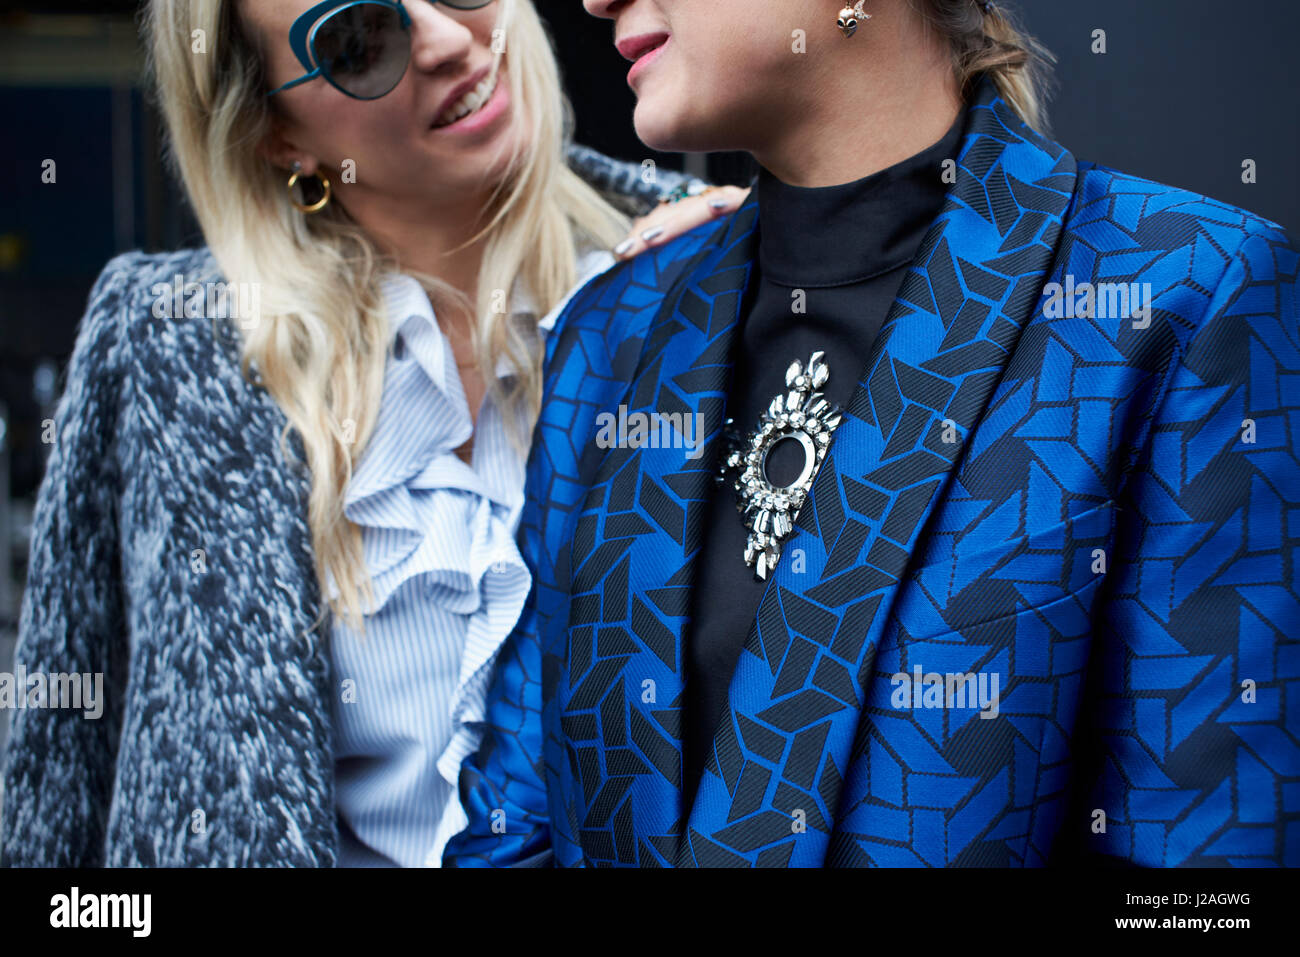 LONDON - FEBRUARY, 2017: Mid section close up of two fashionable women, one wearing a wool jacket and the other a patterned silk jacket, London Fashion Week, day five. Stock Photo